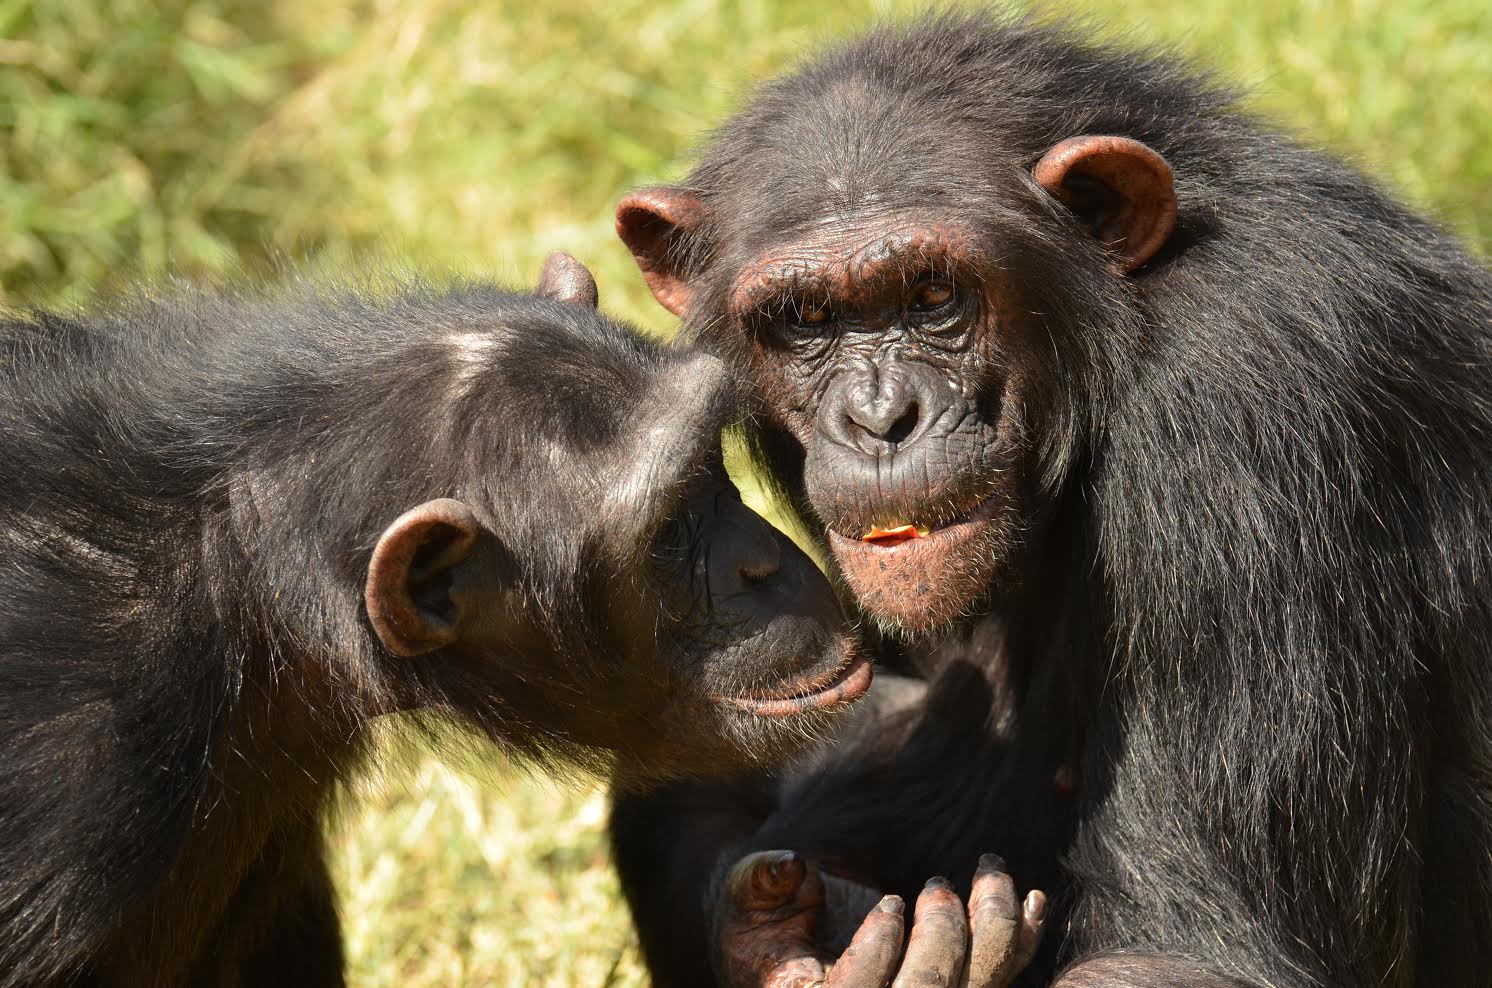 Two of the chimpanzees that participated in the study. Credit: Esther Hermann